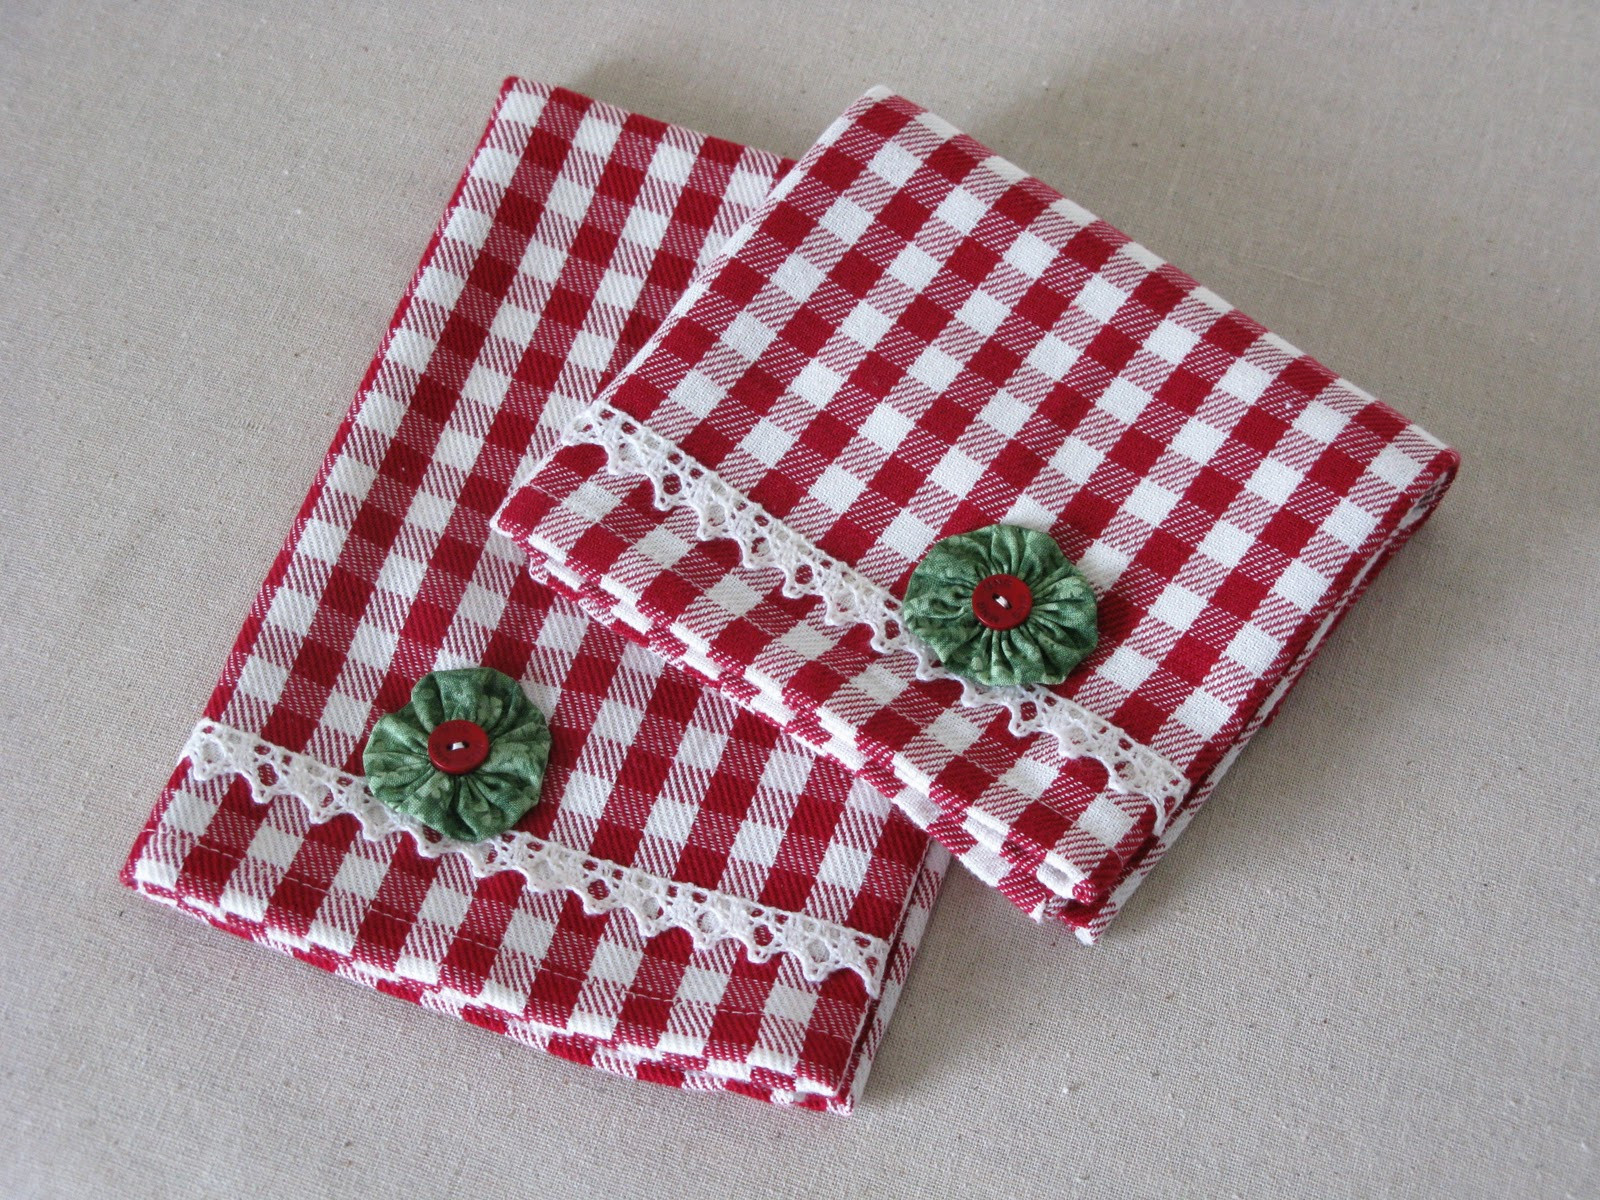 Christmas Kitchen Towels
 Miss Abigail s Hope Chest Christmas Kitchen Towels